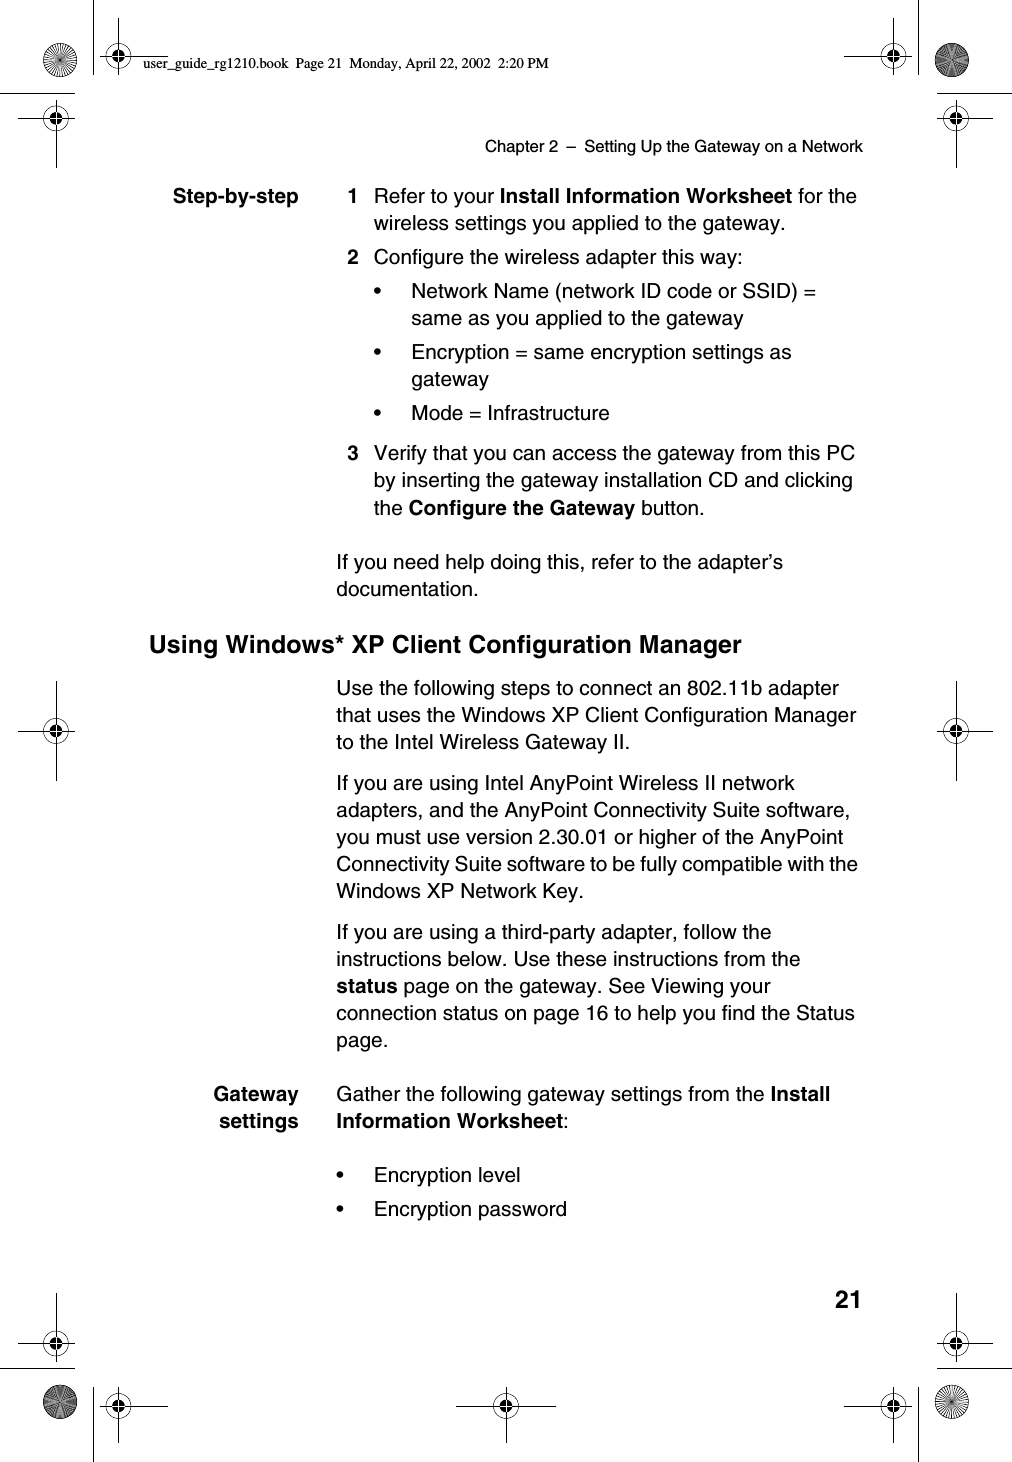 Chapter 2 –SettingUptheGatewayonaNetwork21Step-by-step 1 Refer to your Install Information Worksheet for thewireless settings you applied to the gateway.2Configure the wireless adapter this way:•Network Name (network ID code or SSID) =same as you applied to the gateway•Encryption = same encryption settings asgateway•Mode = Infrastructure3Verify that you can access the gateway from this PCby inserting the gateway installation CD and clickingthe Configure the Gateway button.If you need help doing this, refer to the adapter’sdocumentation.Using Windows* XP Client Configuration ManagerUse the following steps to connect an 802.11b adapterthat uses the Windows XP Client Configuration Managerto the Intel Wireless Gateway II.If you are using Intel AnyPoint Wireless II networkadapters, and the AnyPoint Connectivity Suite software,you must use version 2.30.01 or higher of the AnyPointConnectivity Suite software to be fully compatible with theWindows XP Network Key.If you are using a third-party adapter, follow theinstructions below. Use these instructions from thestatus page on the gateway. See Viewing yourconnection status on page 16 to help you find the Statuspage.GatewaysettingsGather the following gateway settings from the InstallInformation Worksheet:•Encryption level•Encryption passworduser_guide_rg1210.book Page 21 Monday, April 22, 2002 2:20 PM